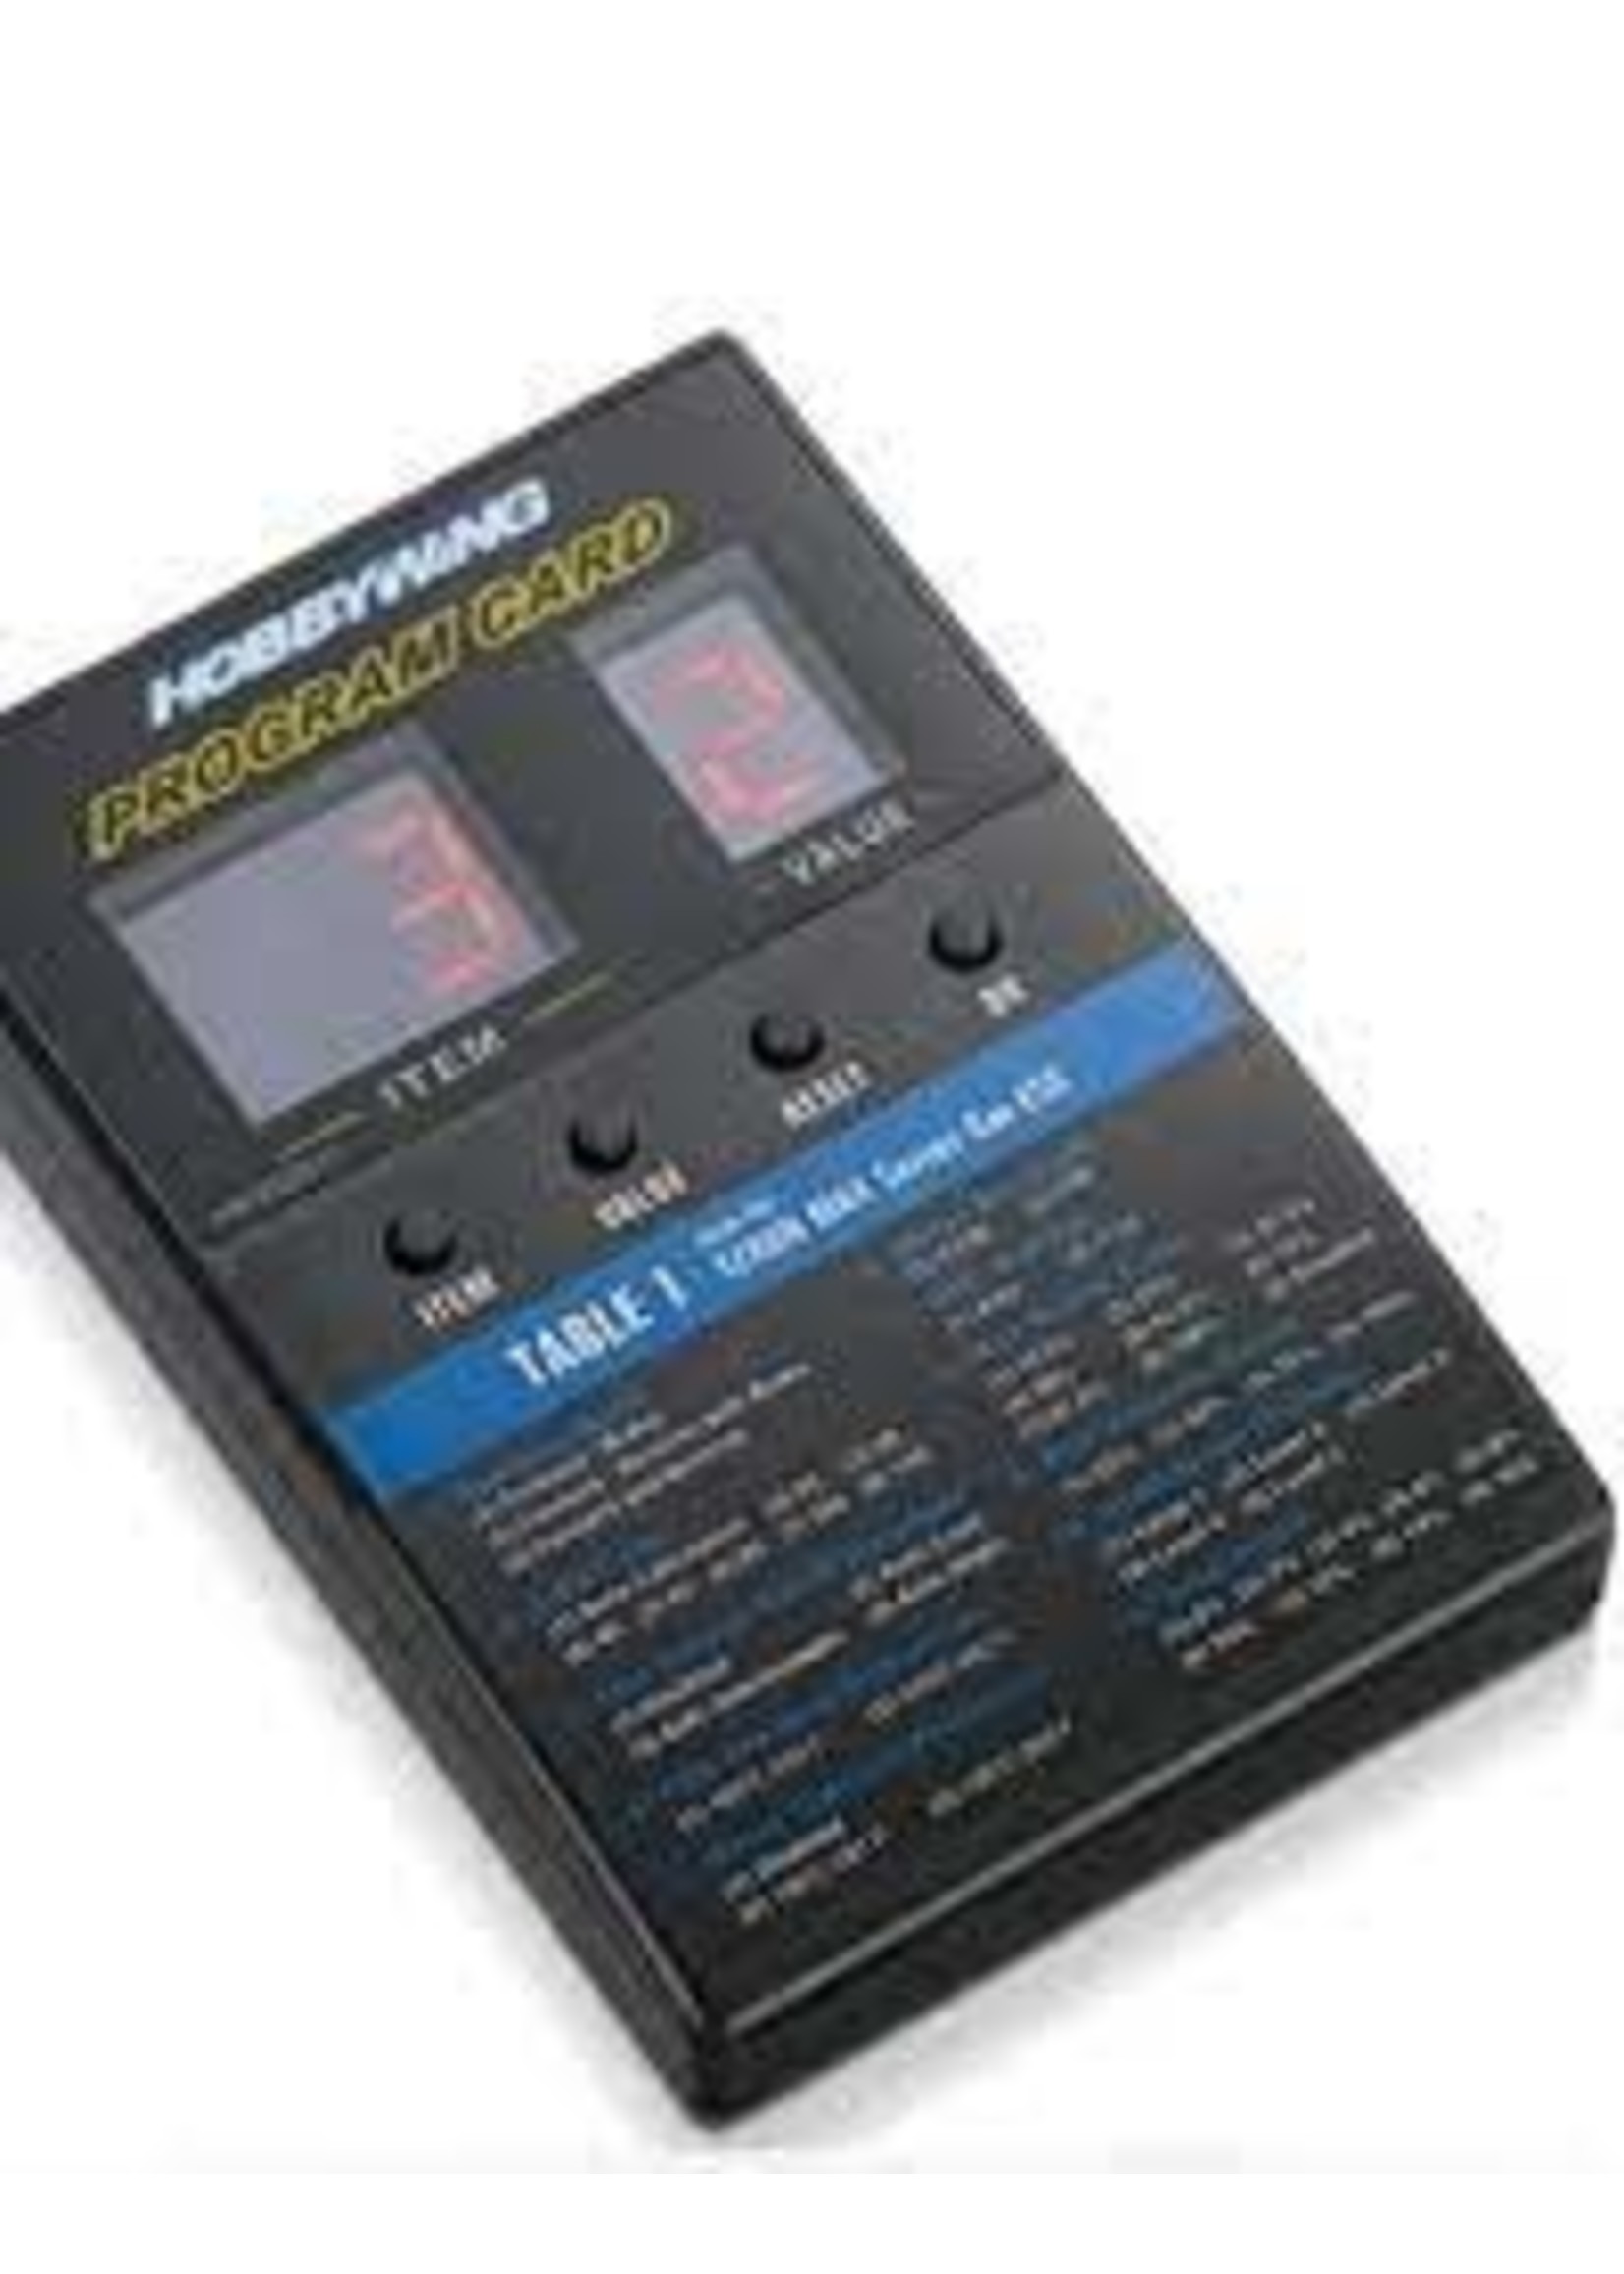 Hobbywing 30501003 LED Program Card - General Use for Cars, Boats, and Air Use